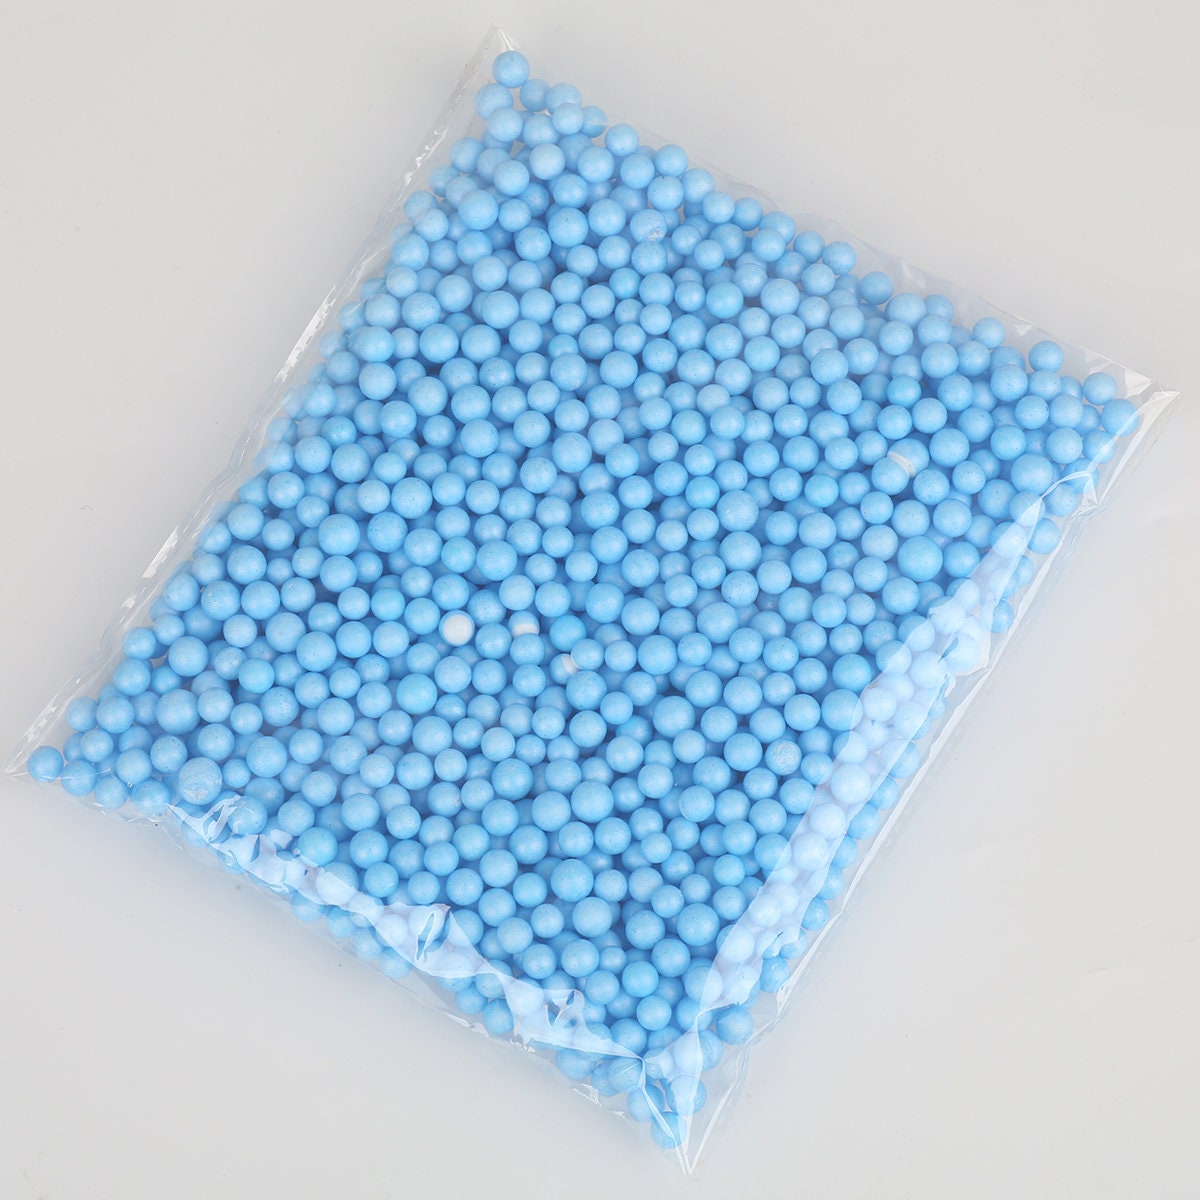 Large Box/Bag 8” x 7” x 3” - Marshmallow Foam Beads For Slime - Smurf Blue